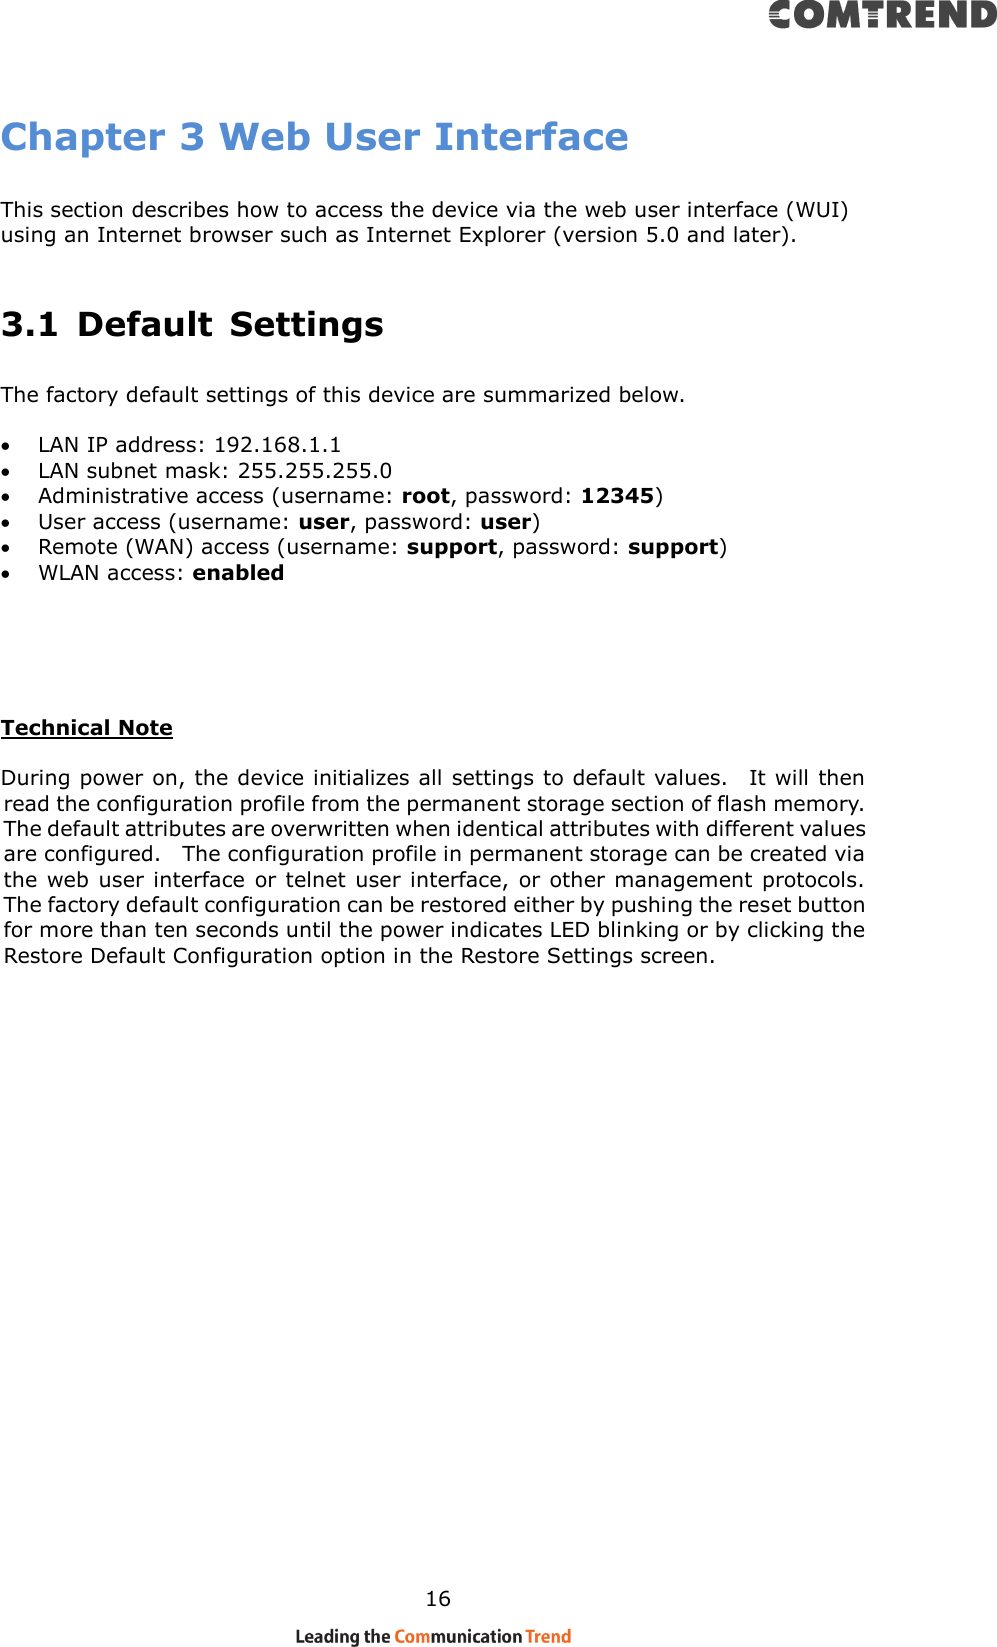 Page 17 of Comtrend VR3063U Home Gateway User Manual CT 5374